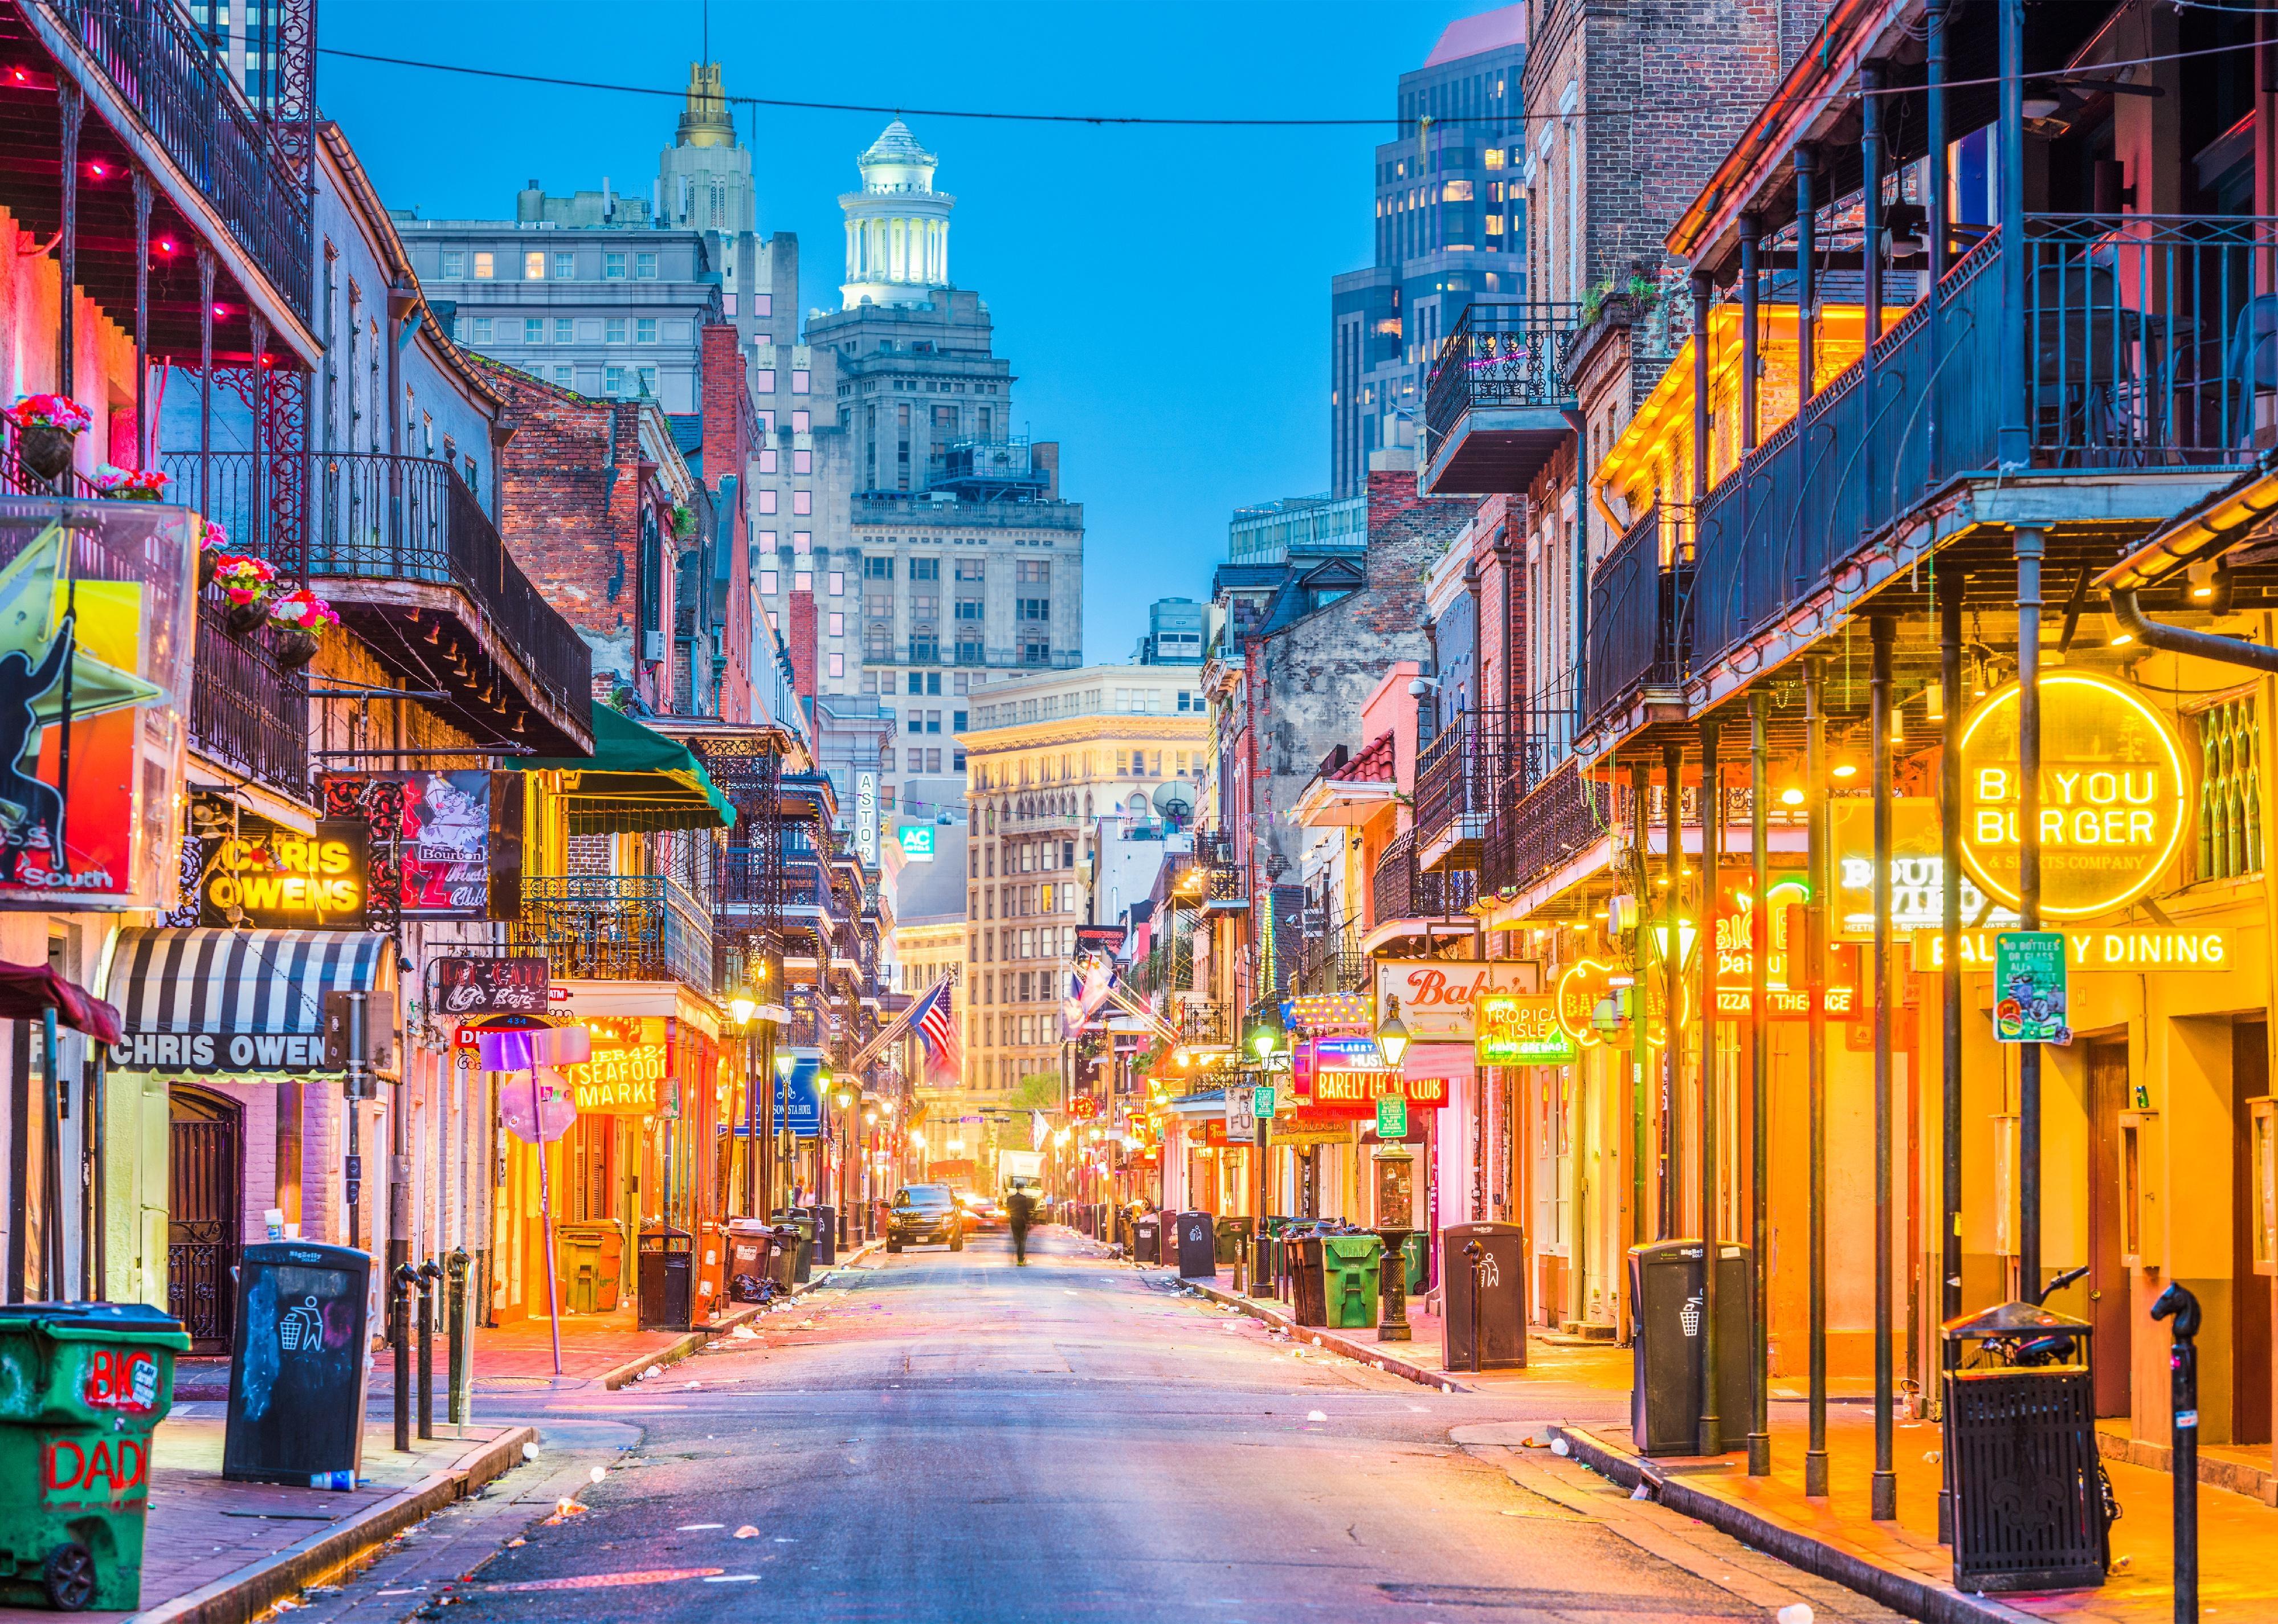 Bourbon Street comes alive in New Orleans.